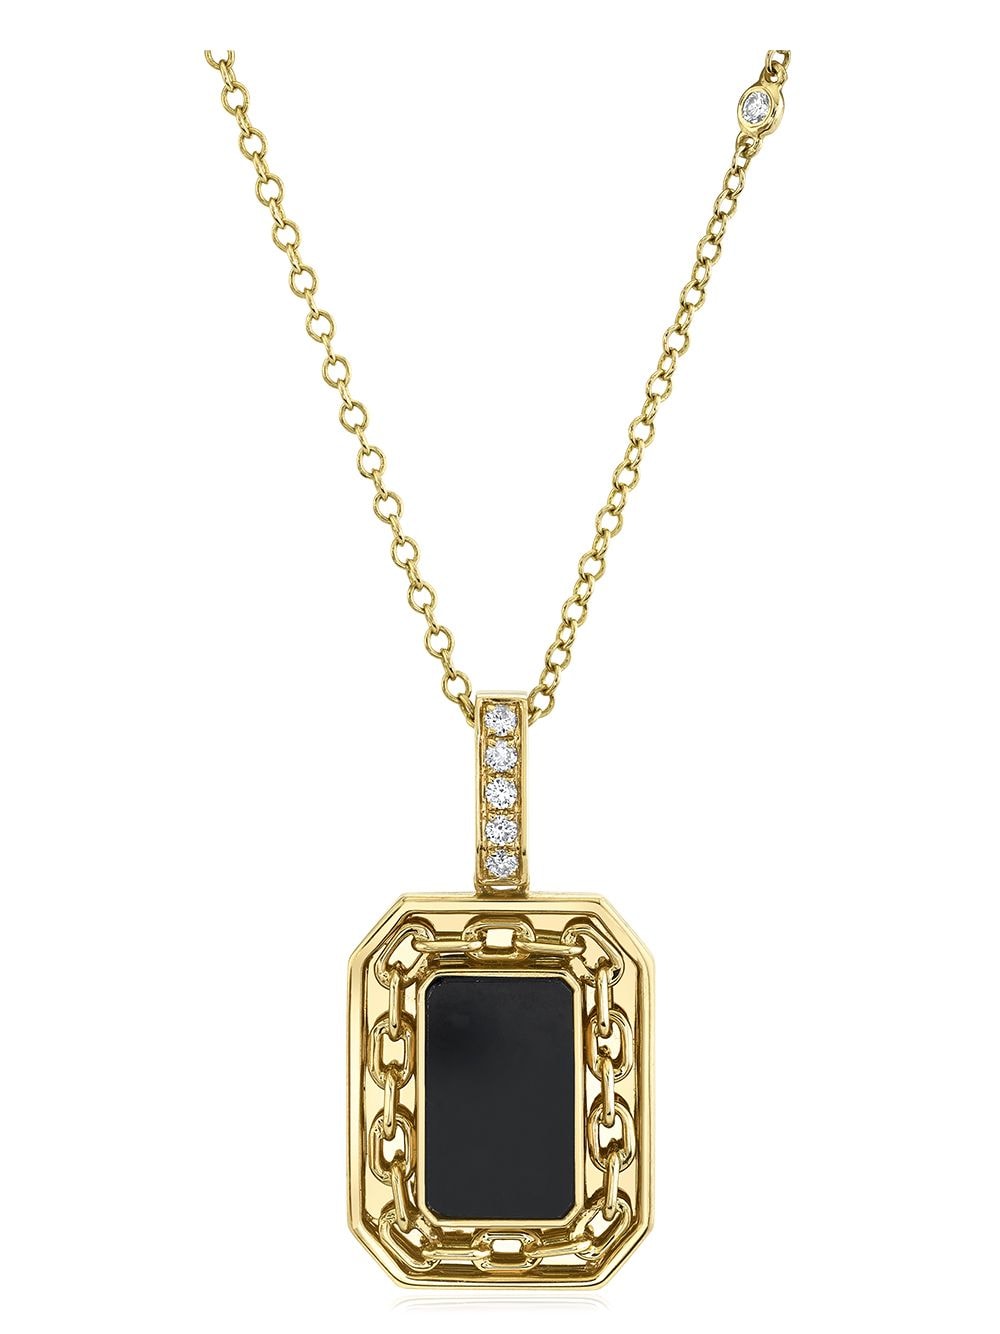 SHAY 18KT YELLOW GOLD DIAMOND AND ONYX PENDANT NECKLACE